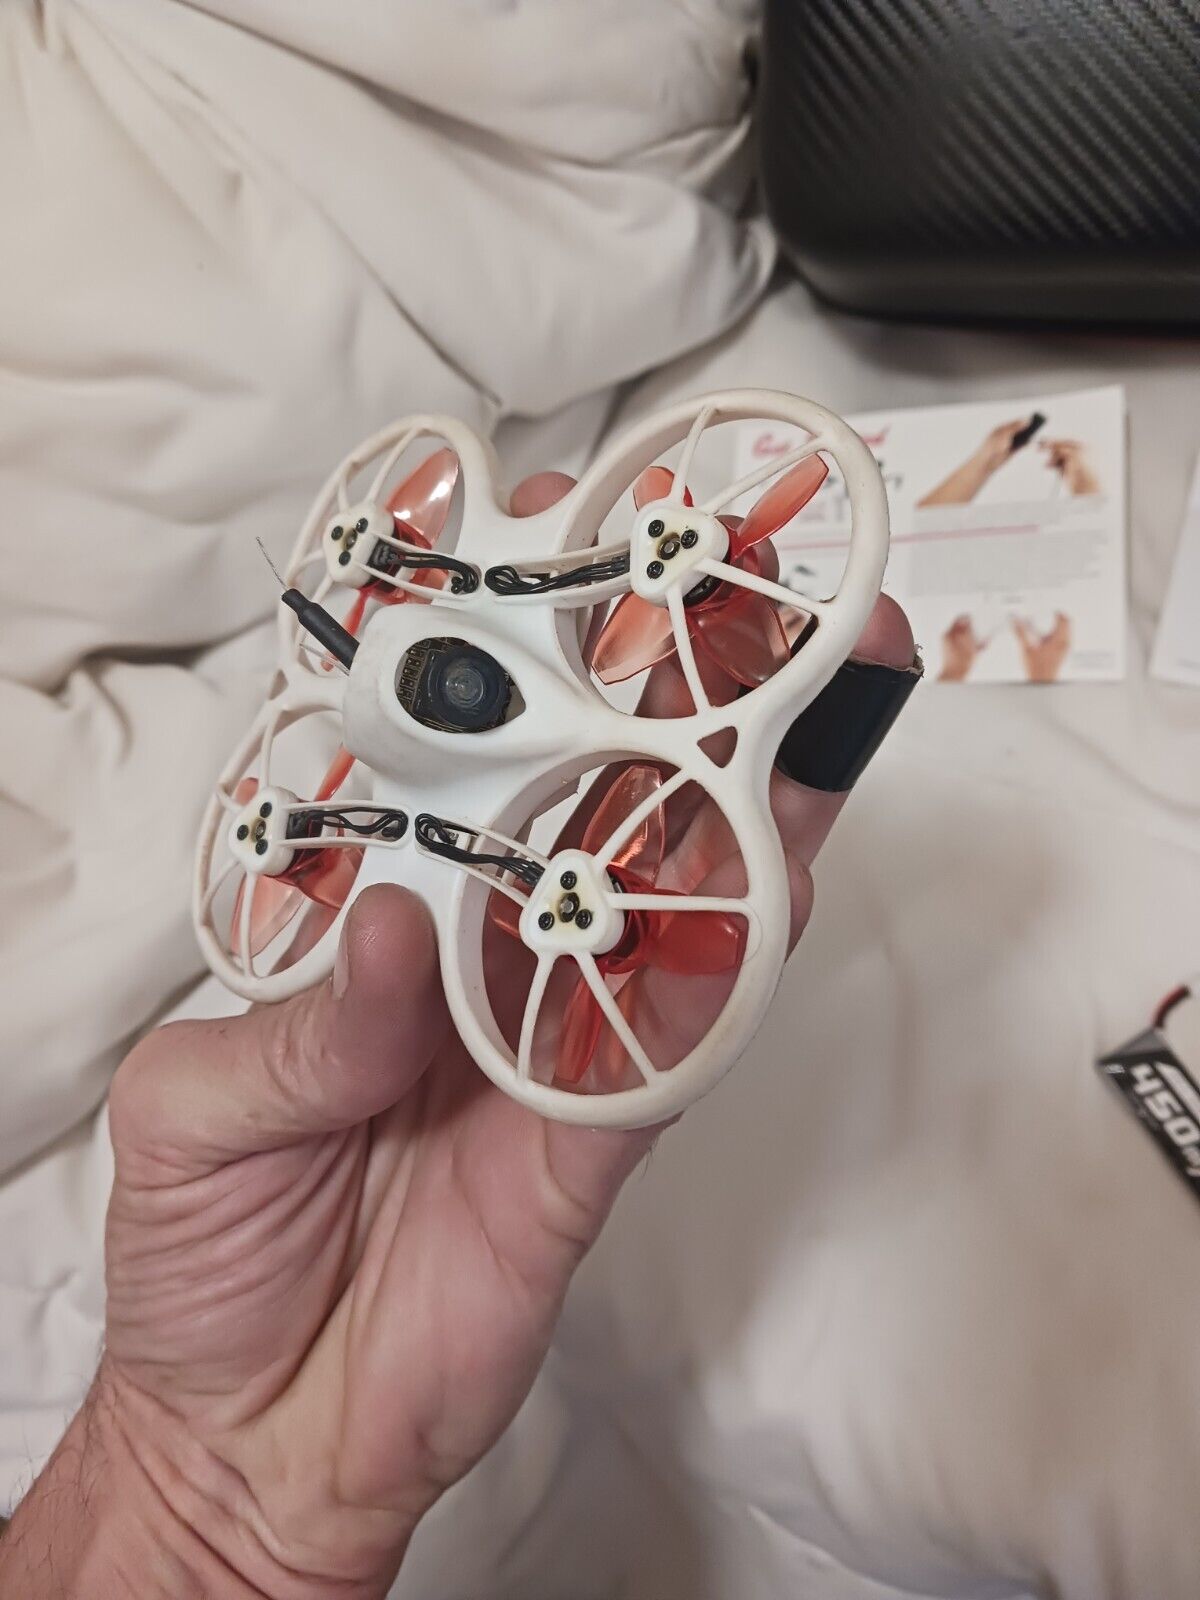 Tinyhawk Indoor Racing Drone with FPV Goggles